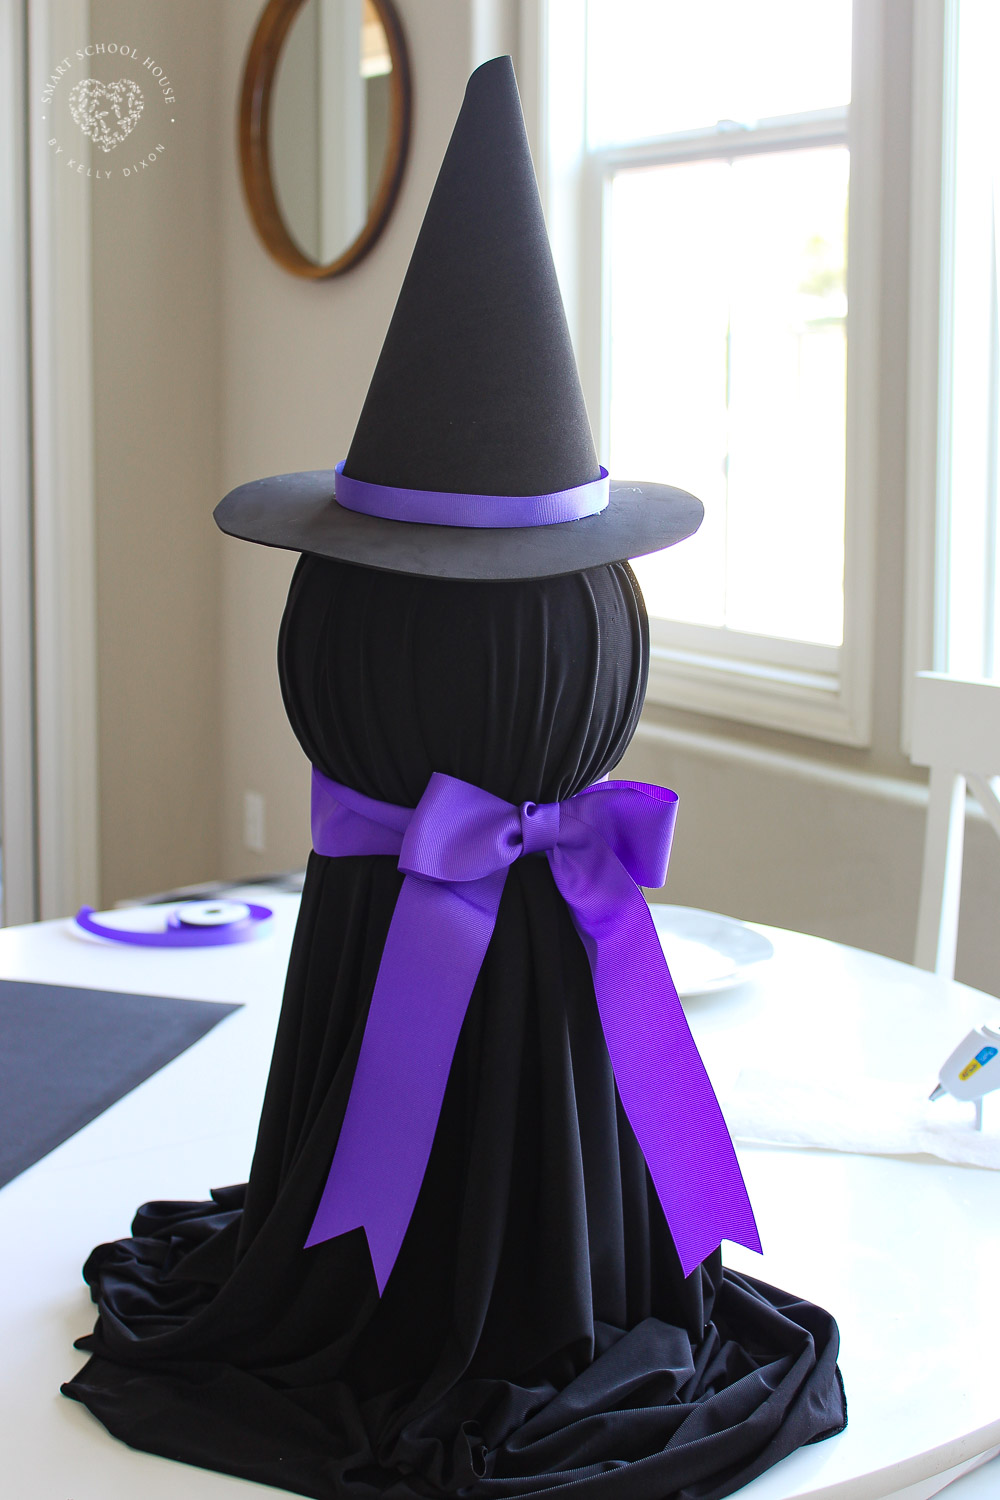 How to Make a Paper Towel Roll Witch with a Styrofoam ball for Halloween!